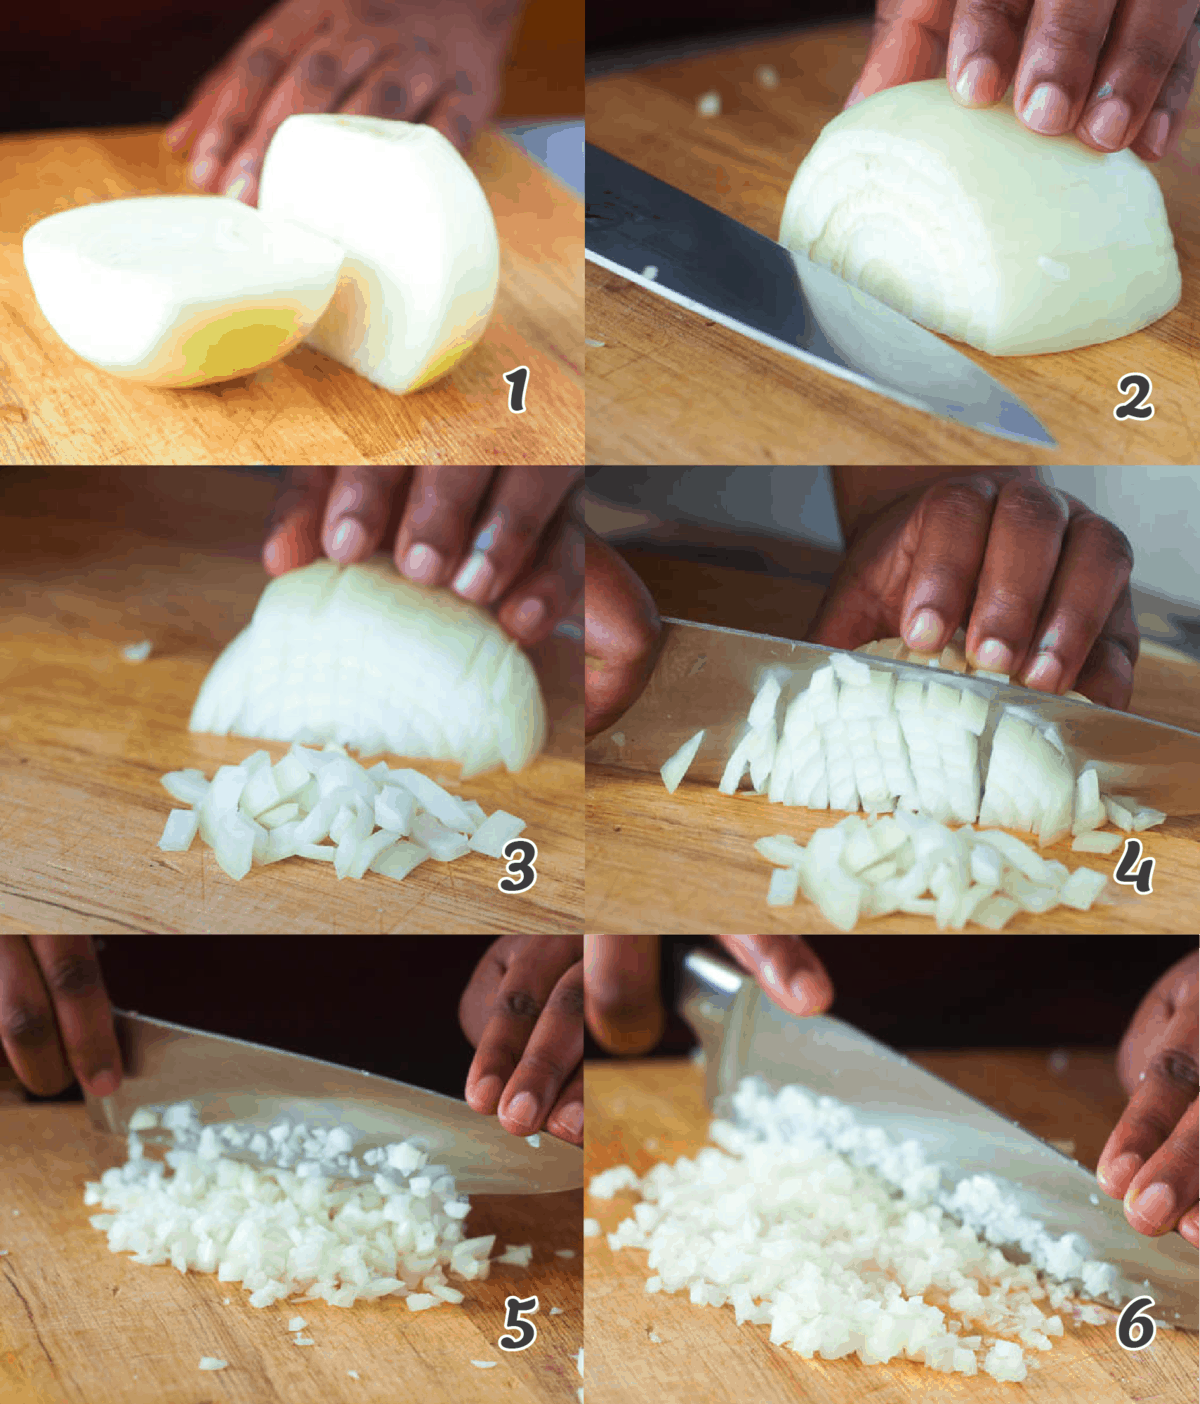 How to Cut Onions - Immaculate Bites